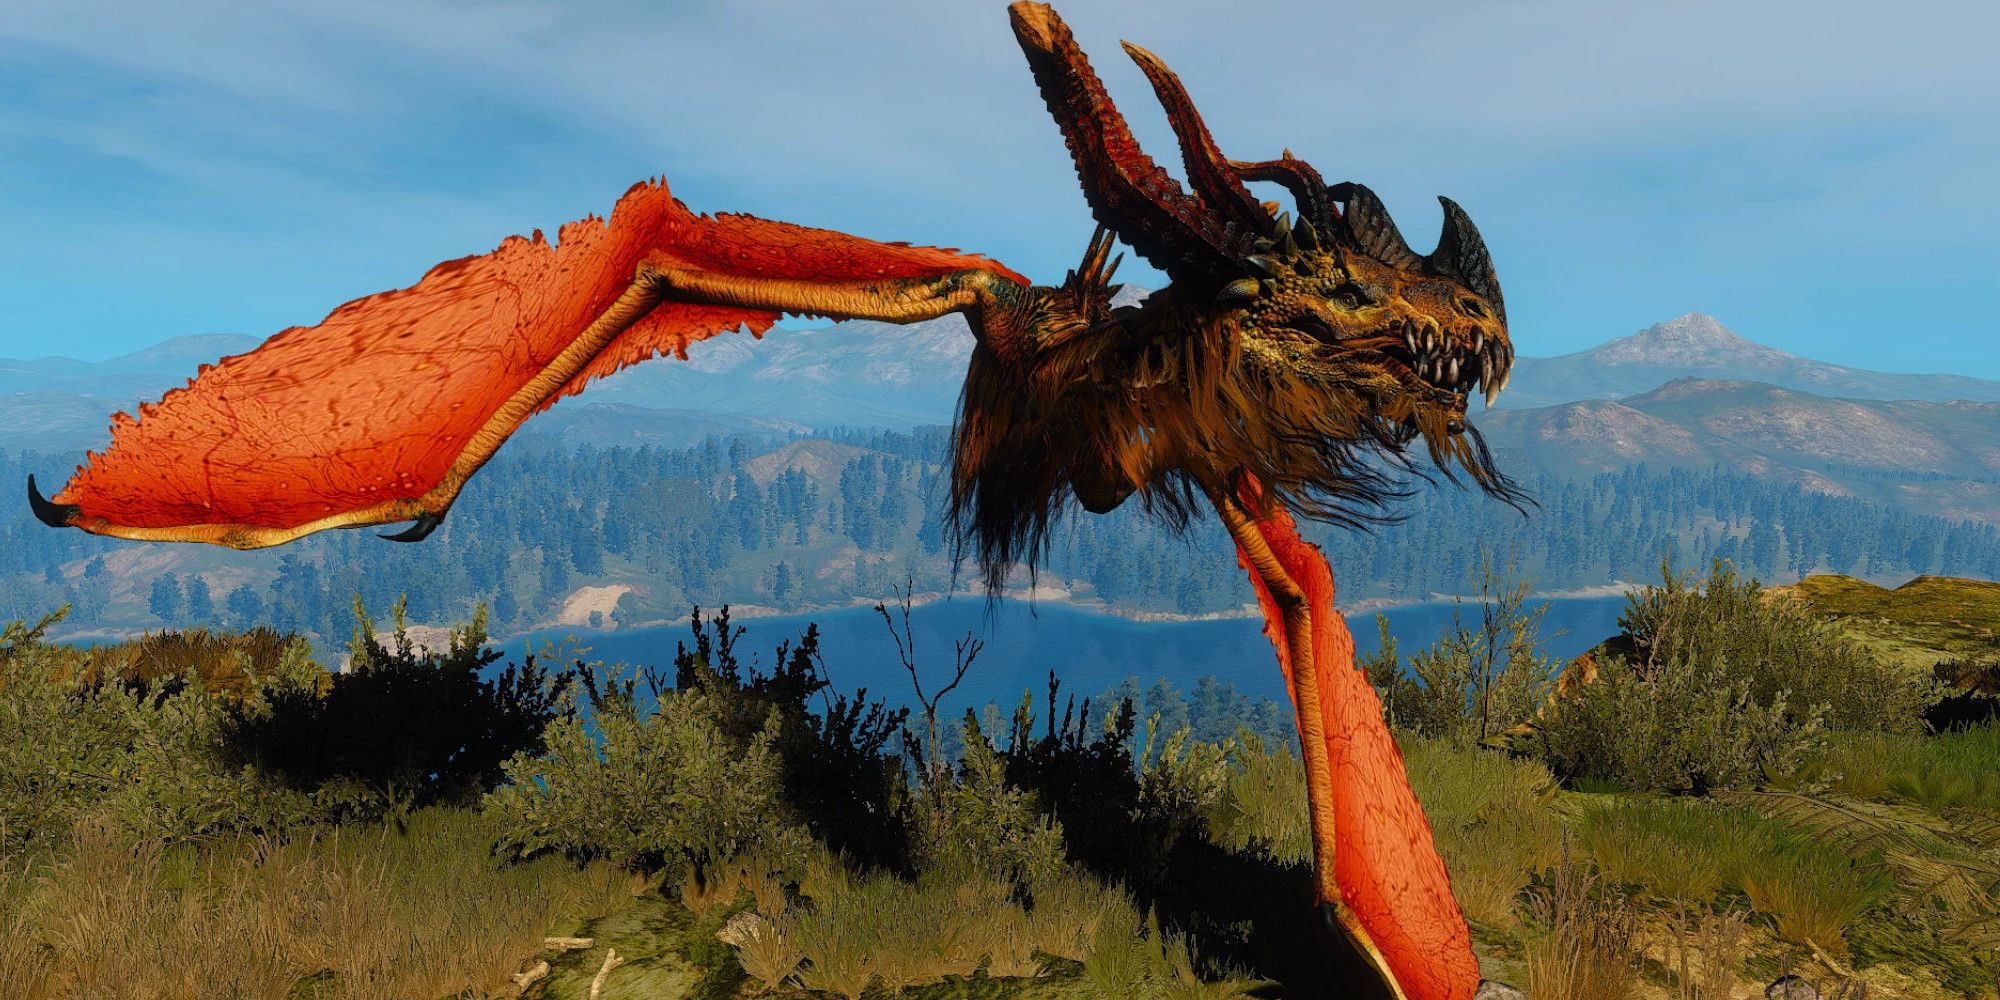 A royal wyvern flies over a grassy cliff